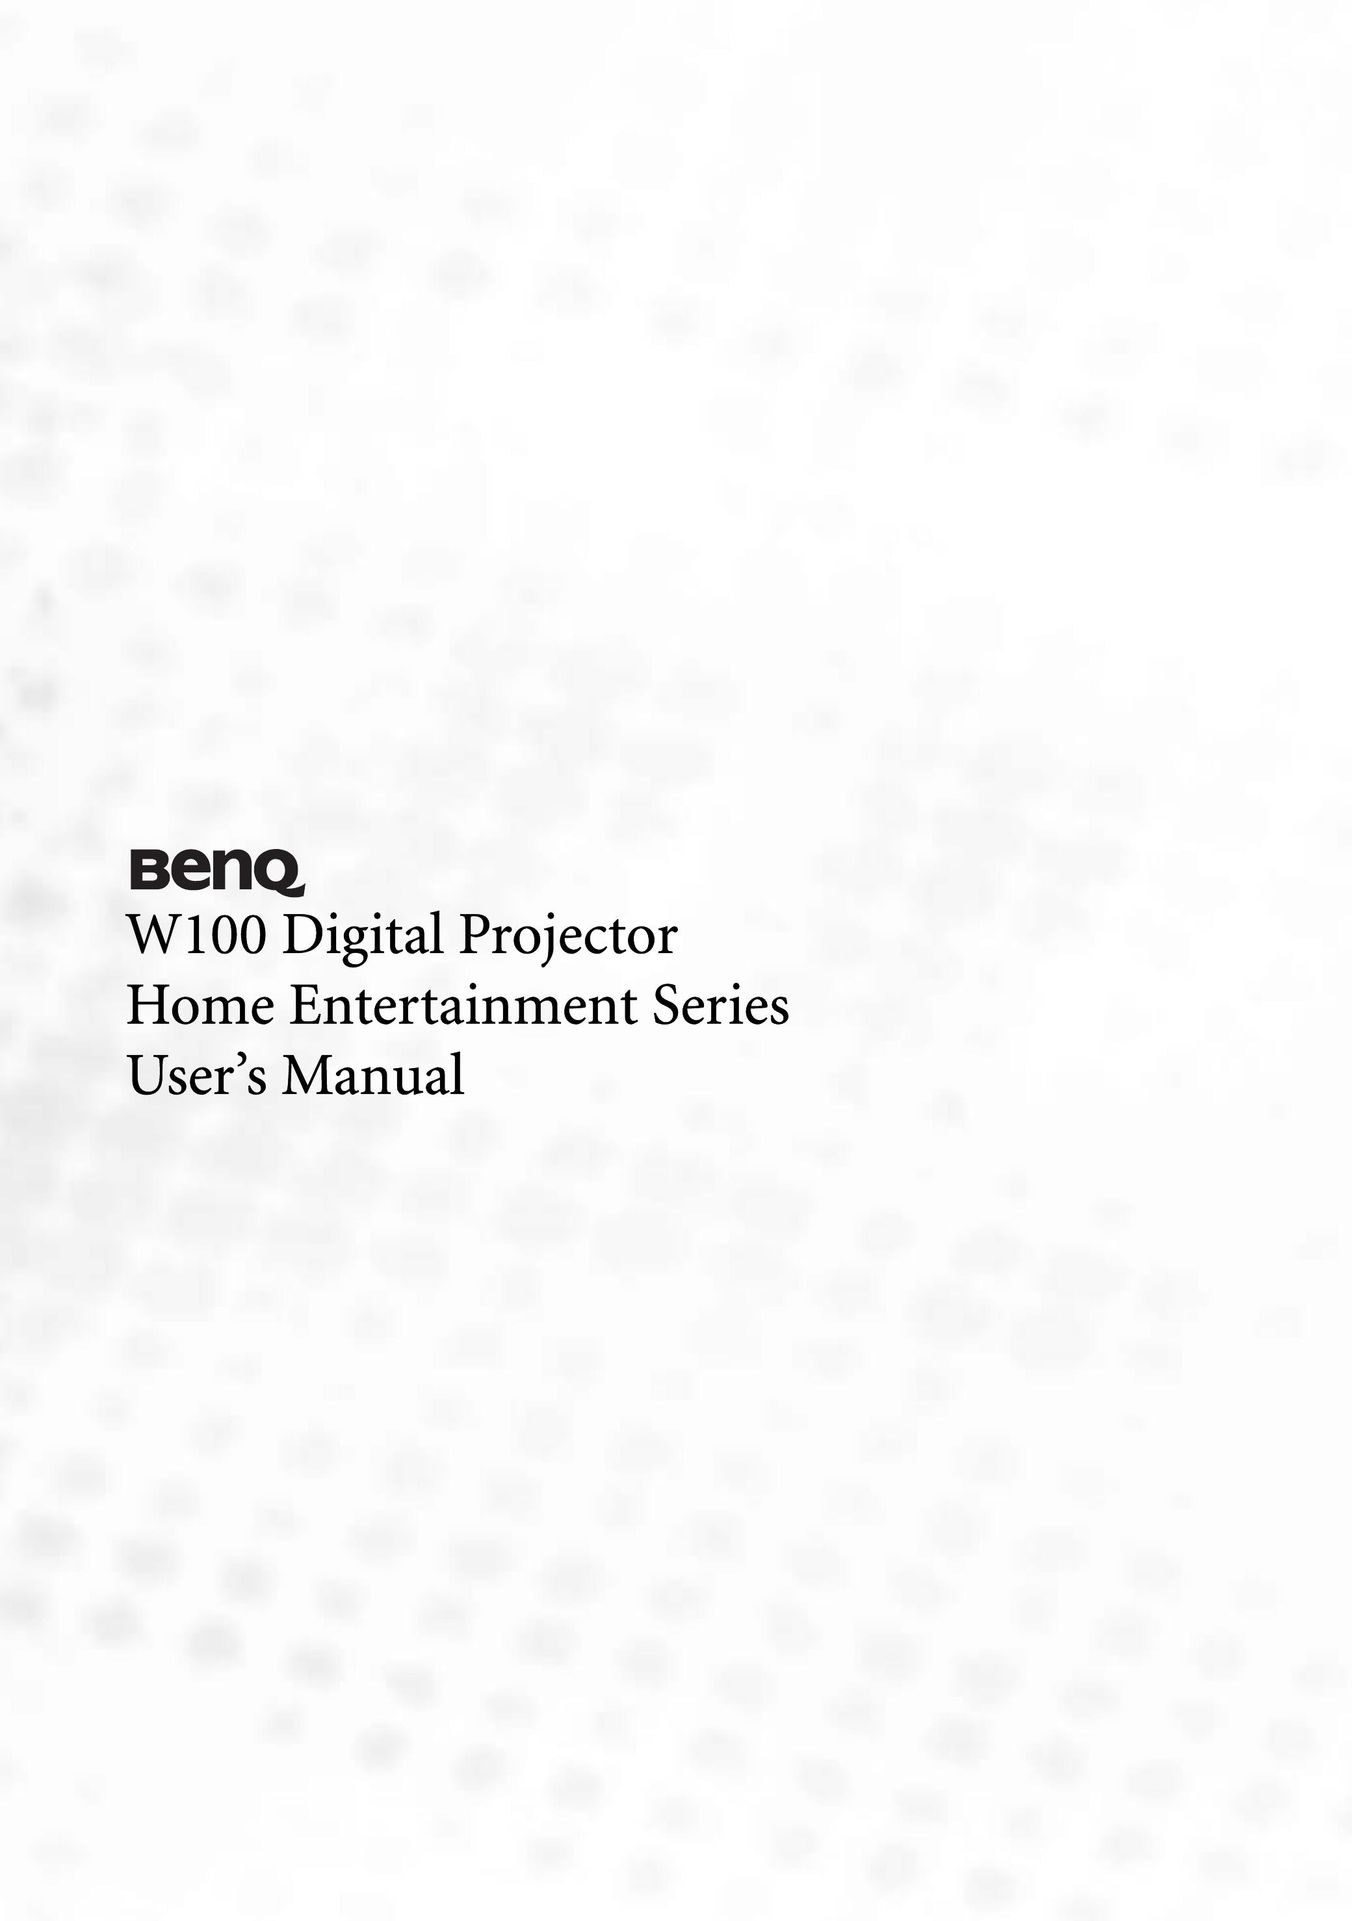 BenQ W100 Projection Television User Manual